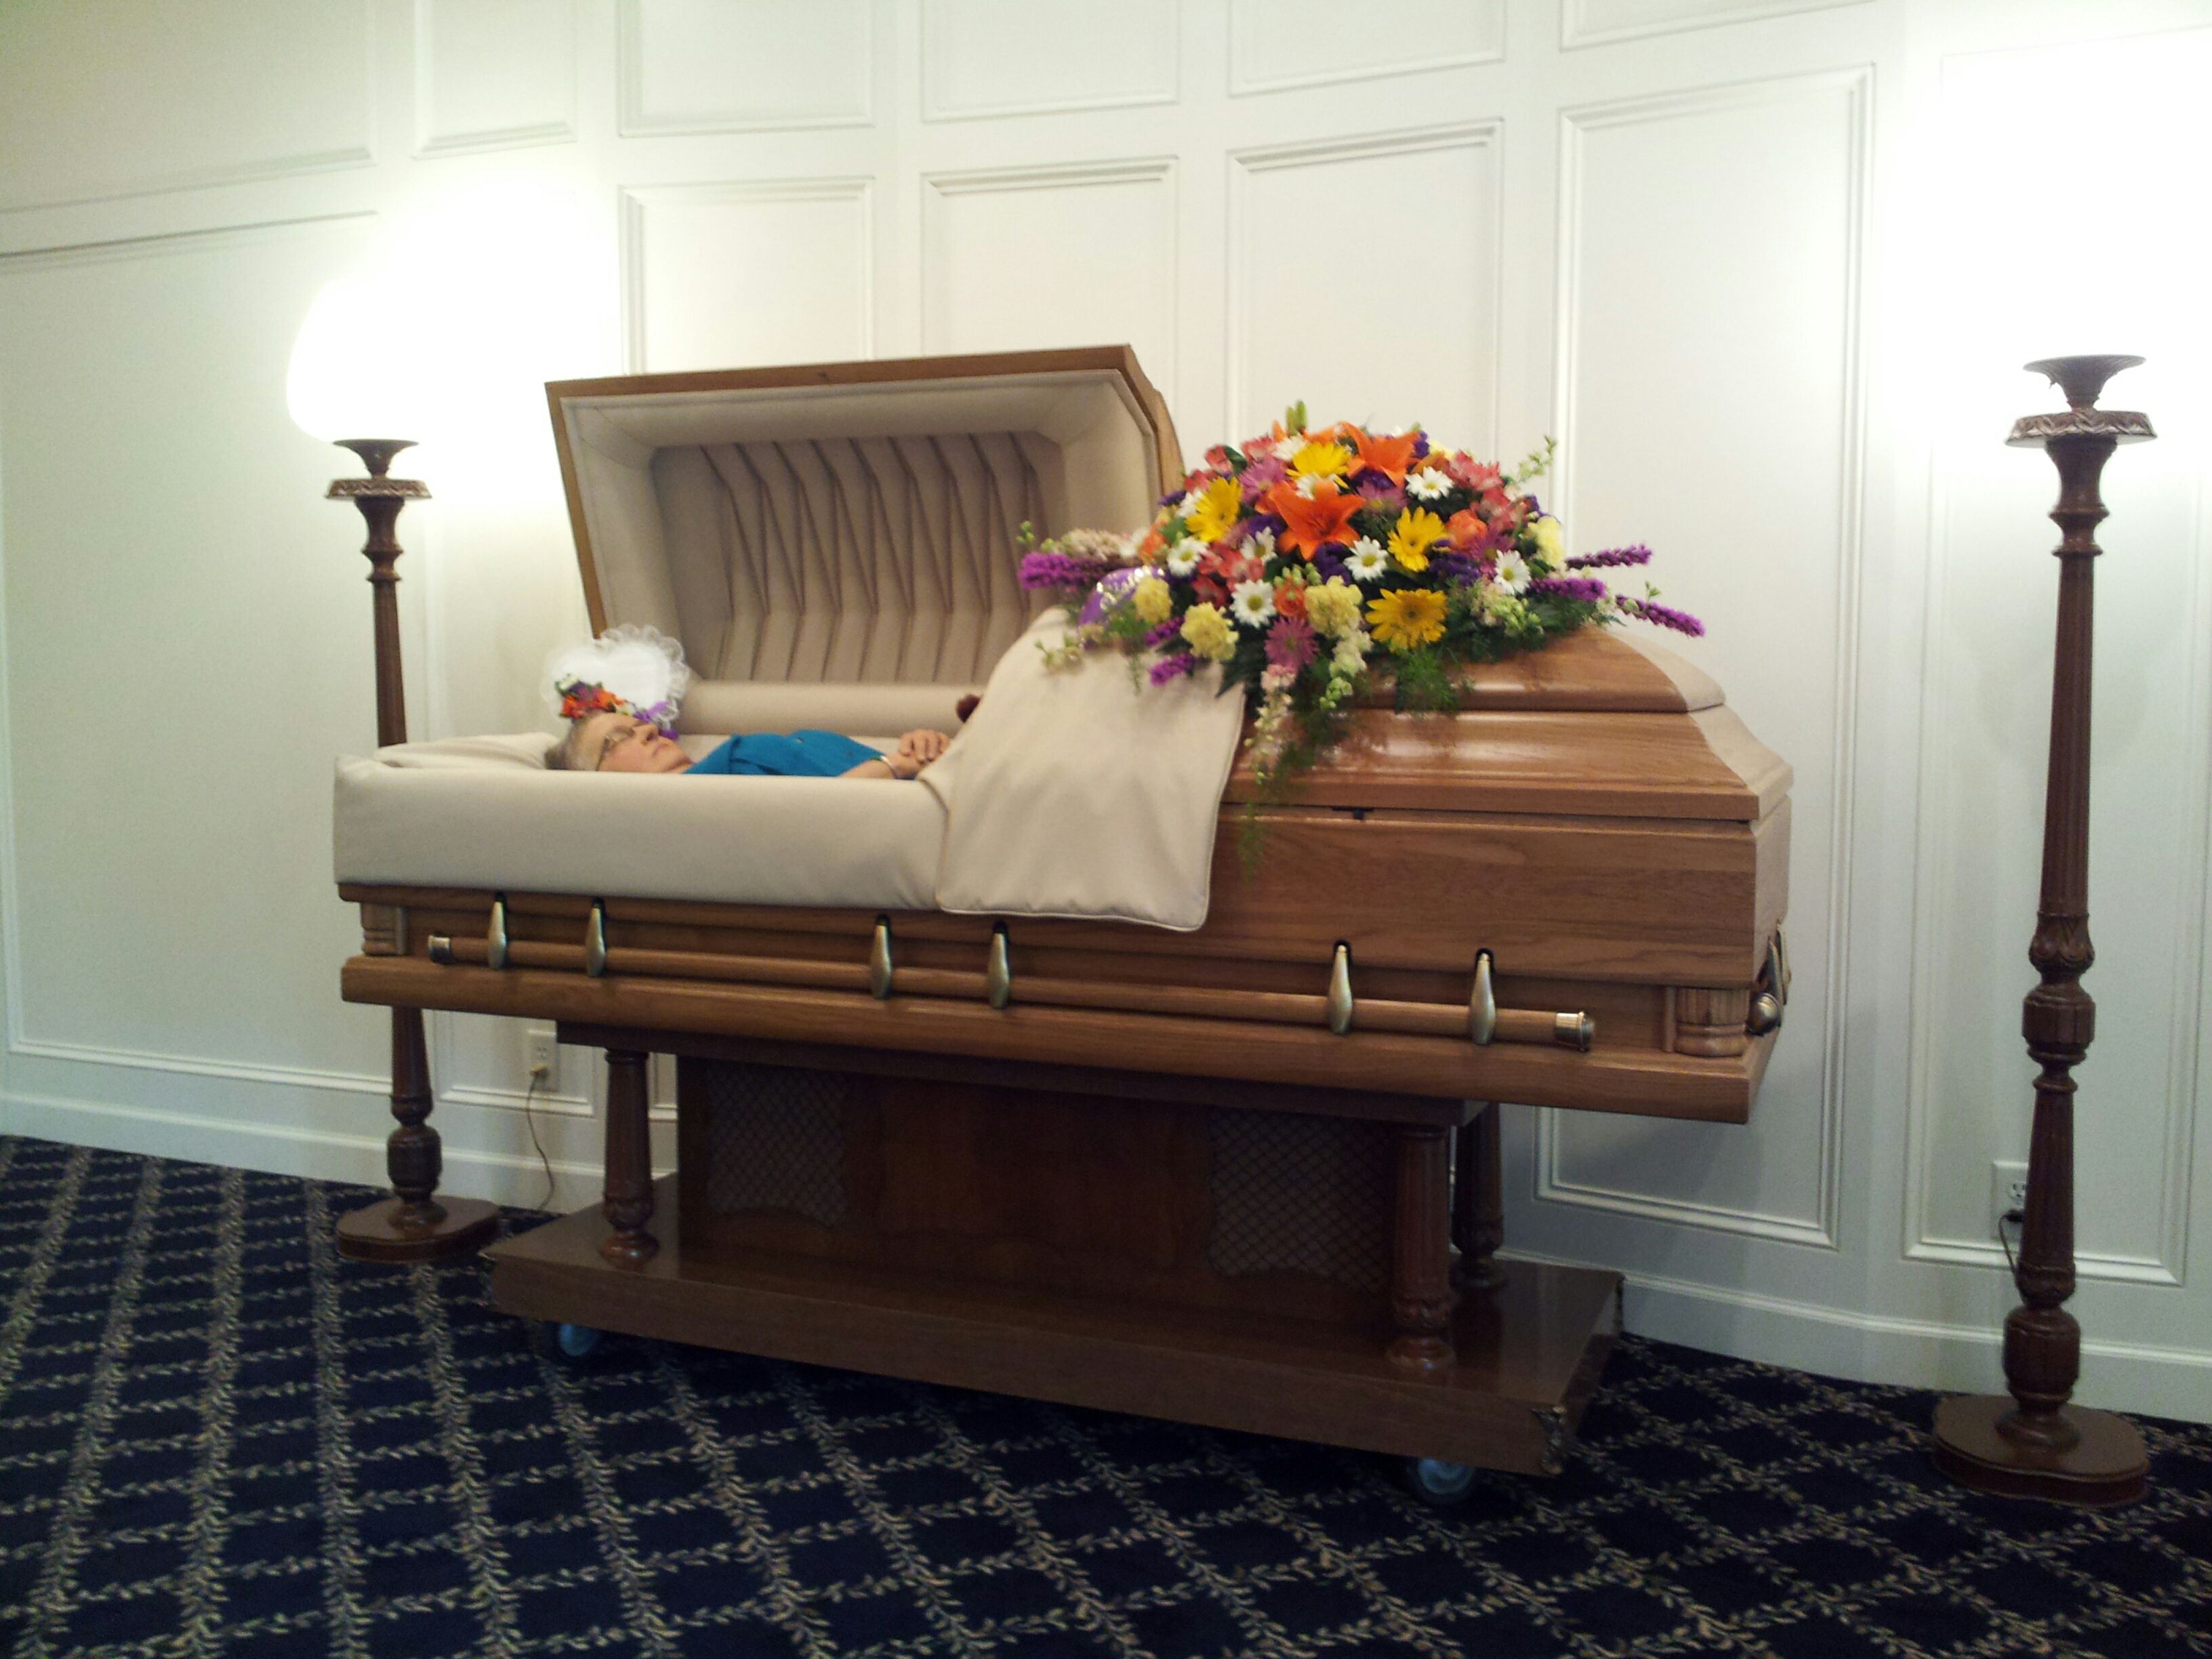 Jp holley funeral home